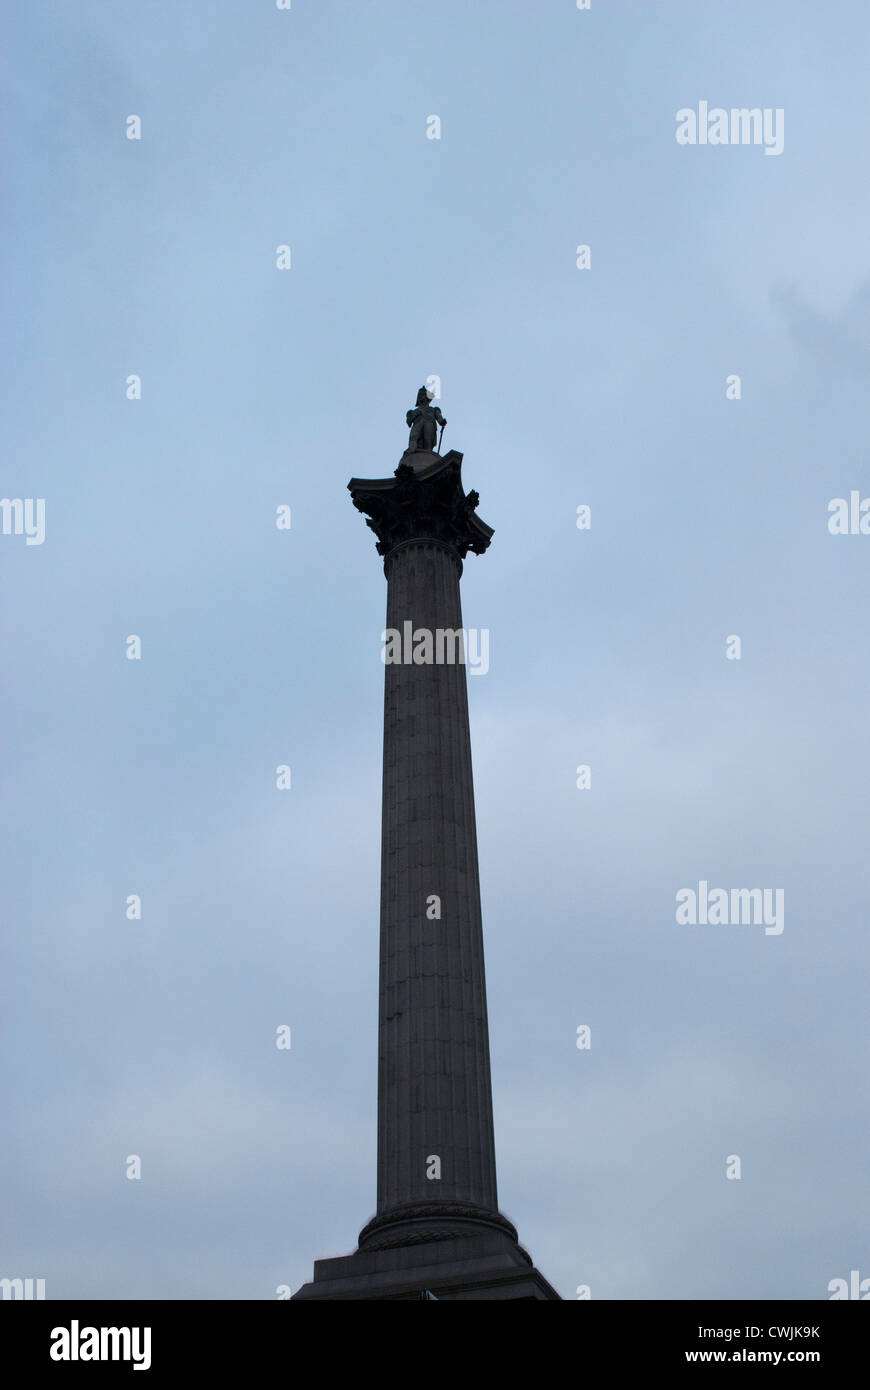 Looking up at Nelson's Column against a cloudy sky Stock Photo